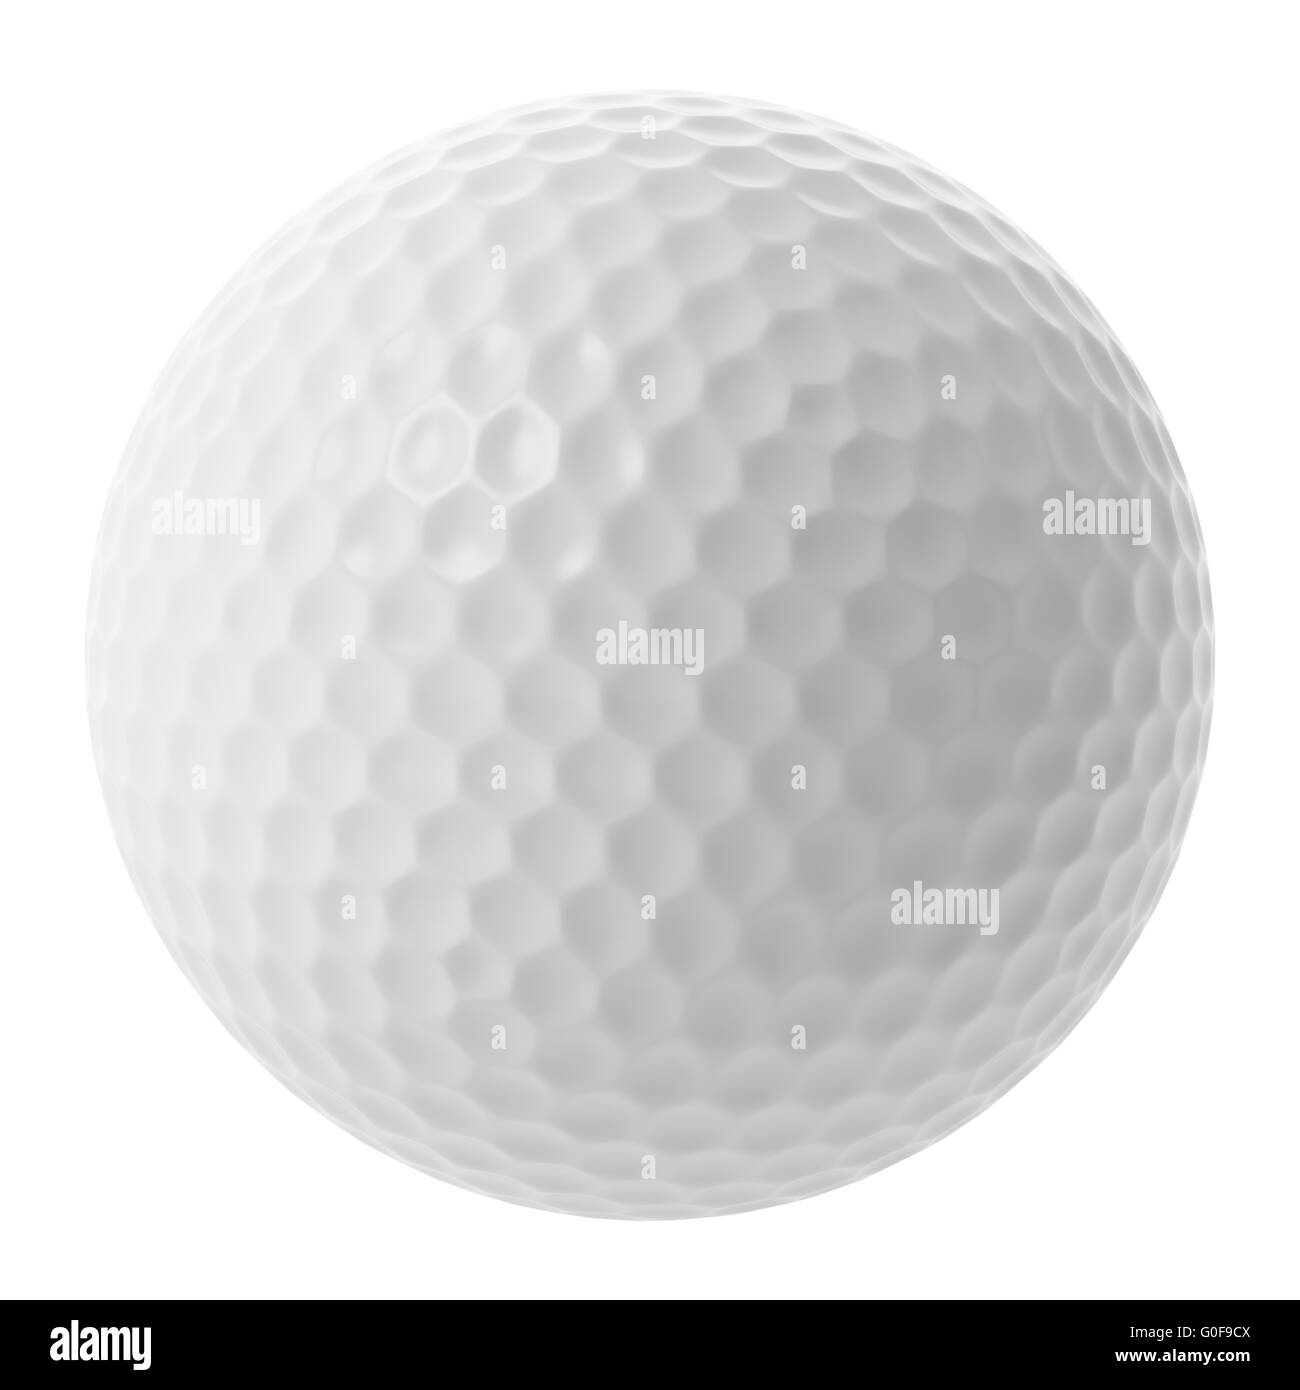 The golfball Cut Out Stock Images & Pictures - Alamy